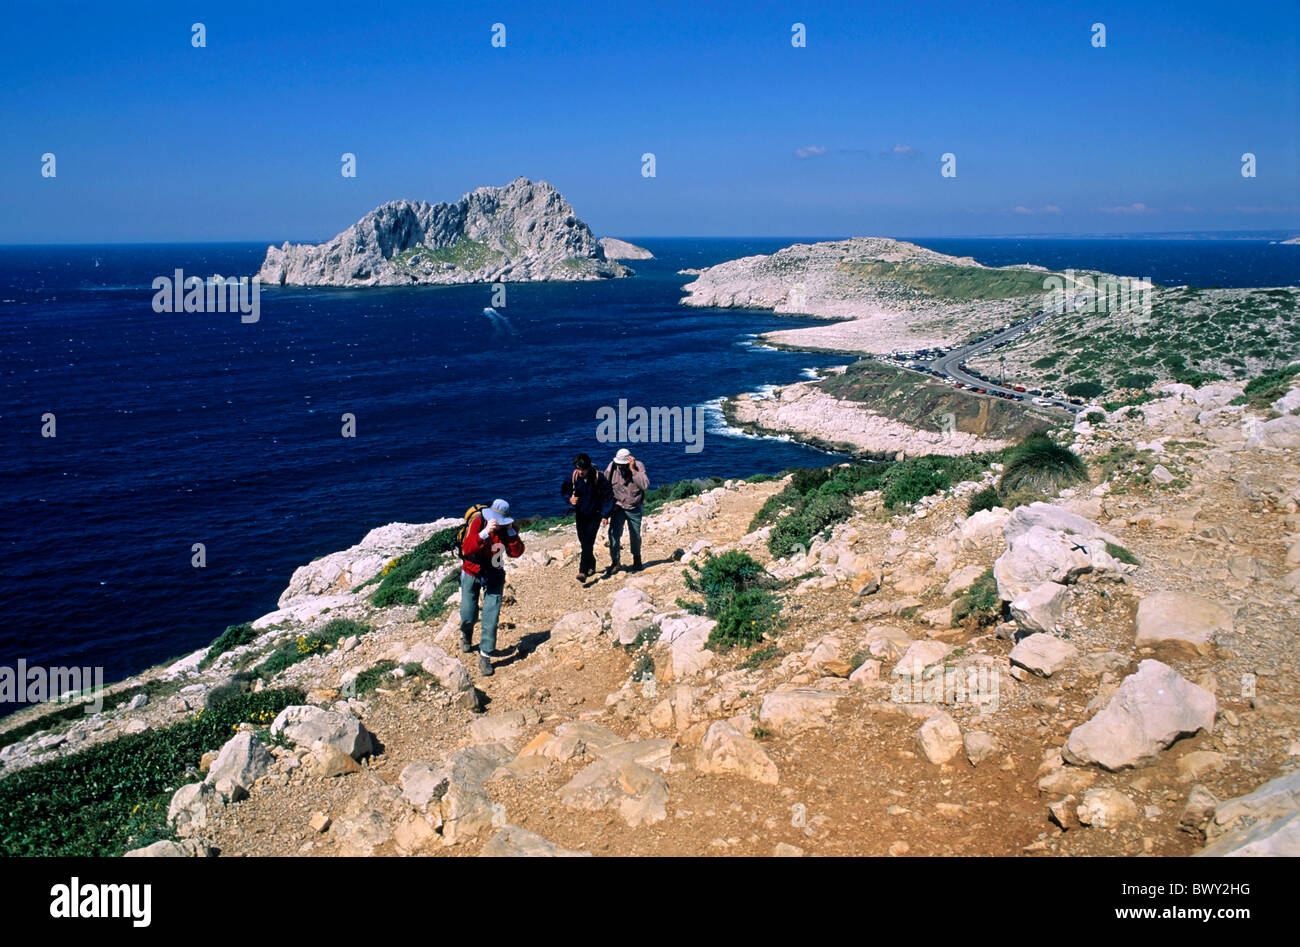 View of Maire Island and Cape Croisette from Callelongue, Marseille, France. Stock Photo